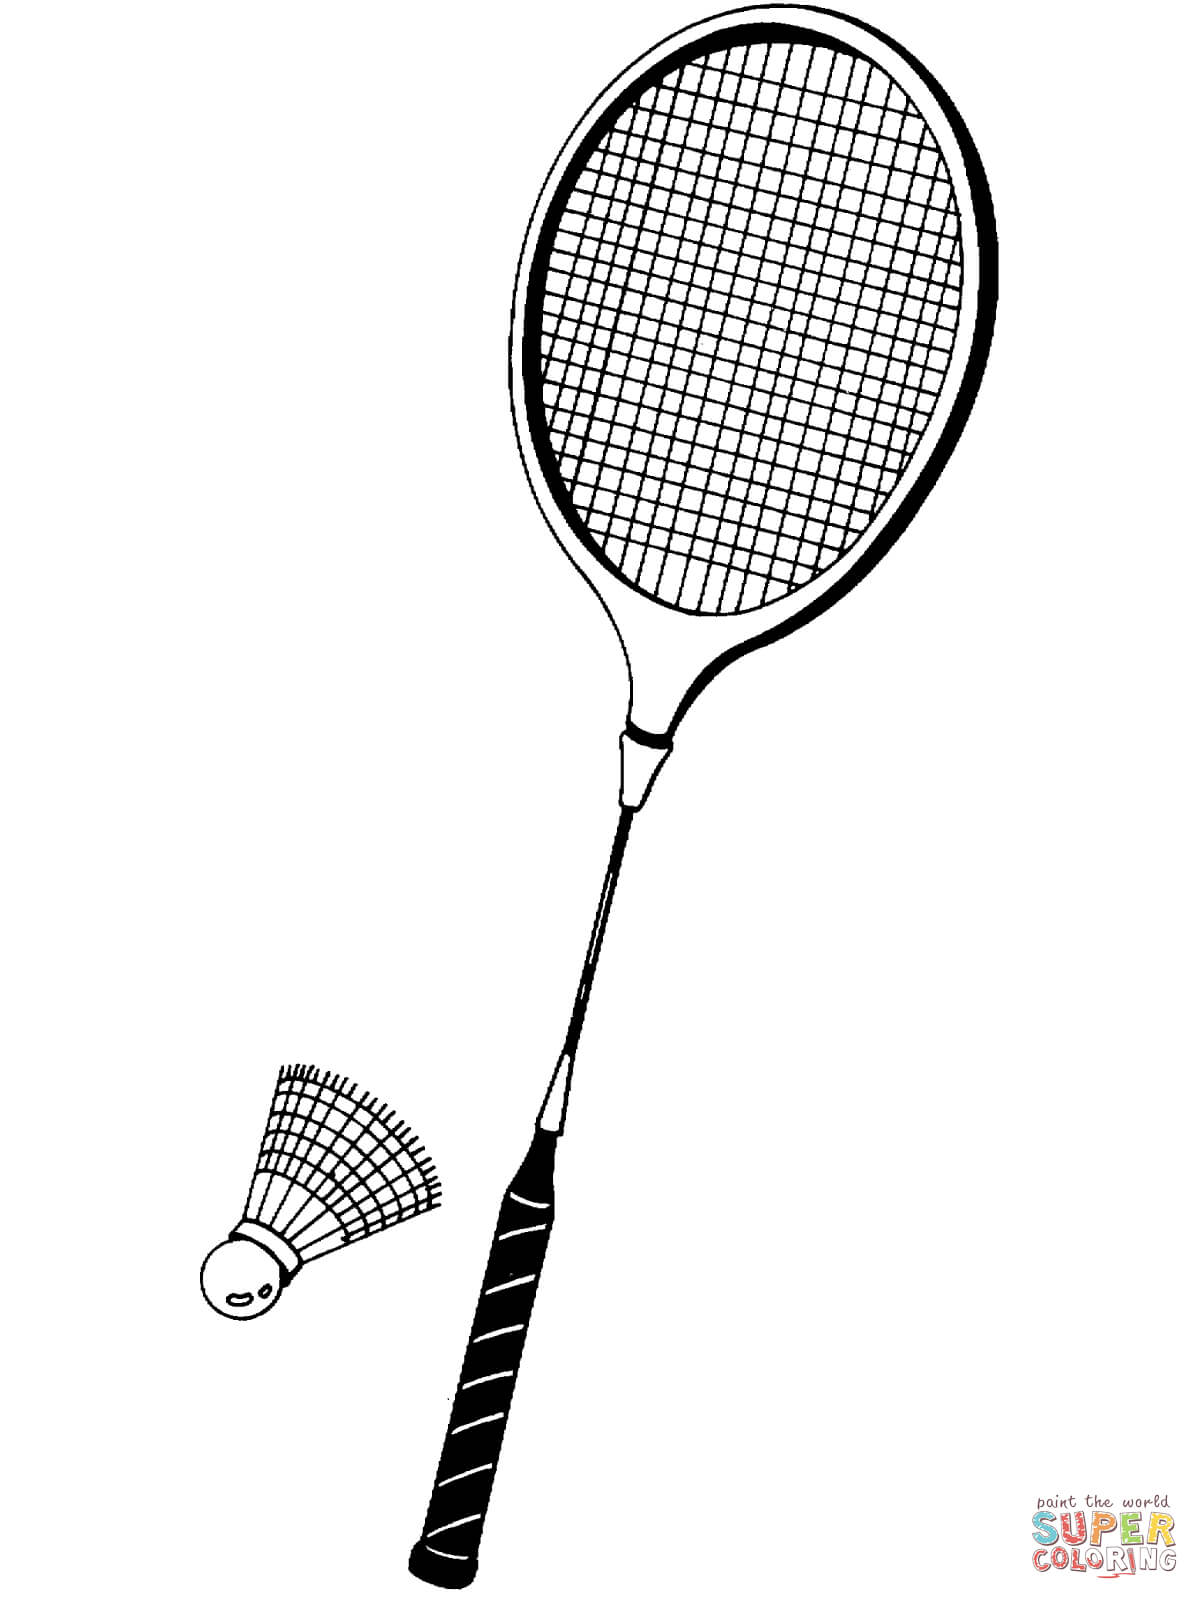 Shuttlecock and badminton racket coloring page free printable coloring pages